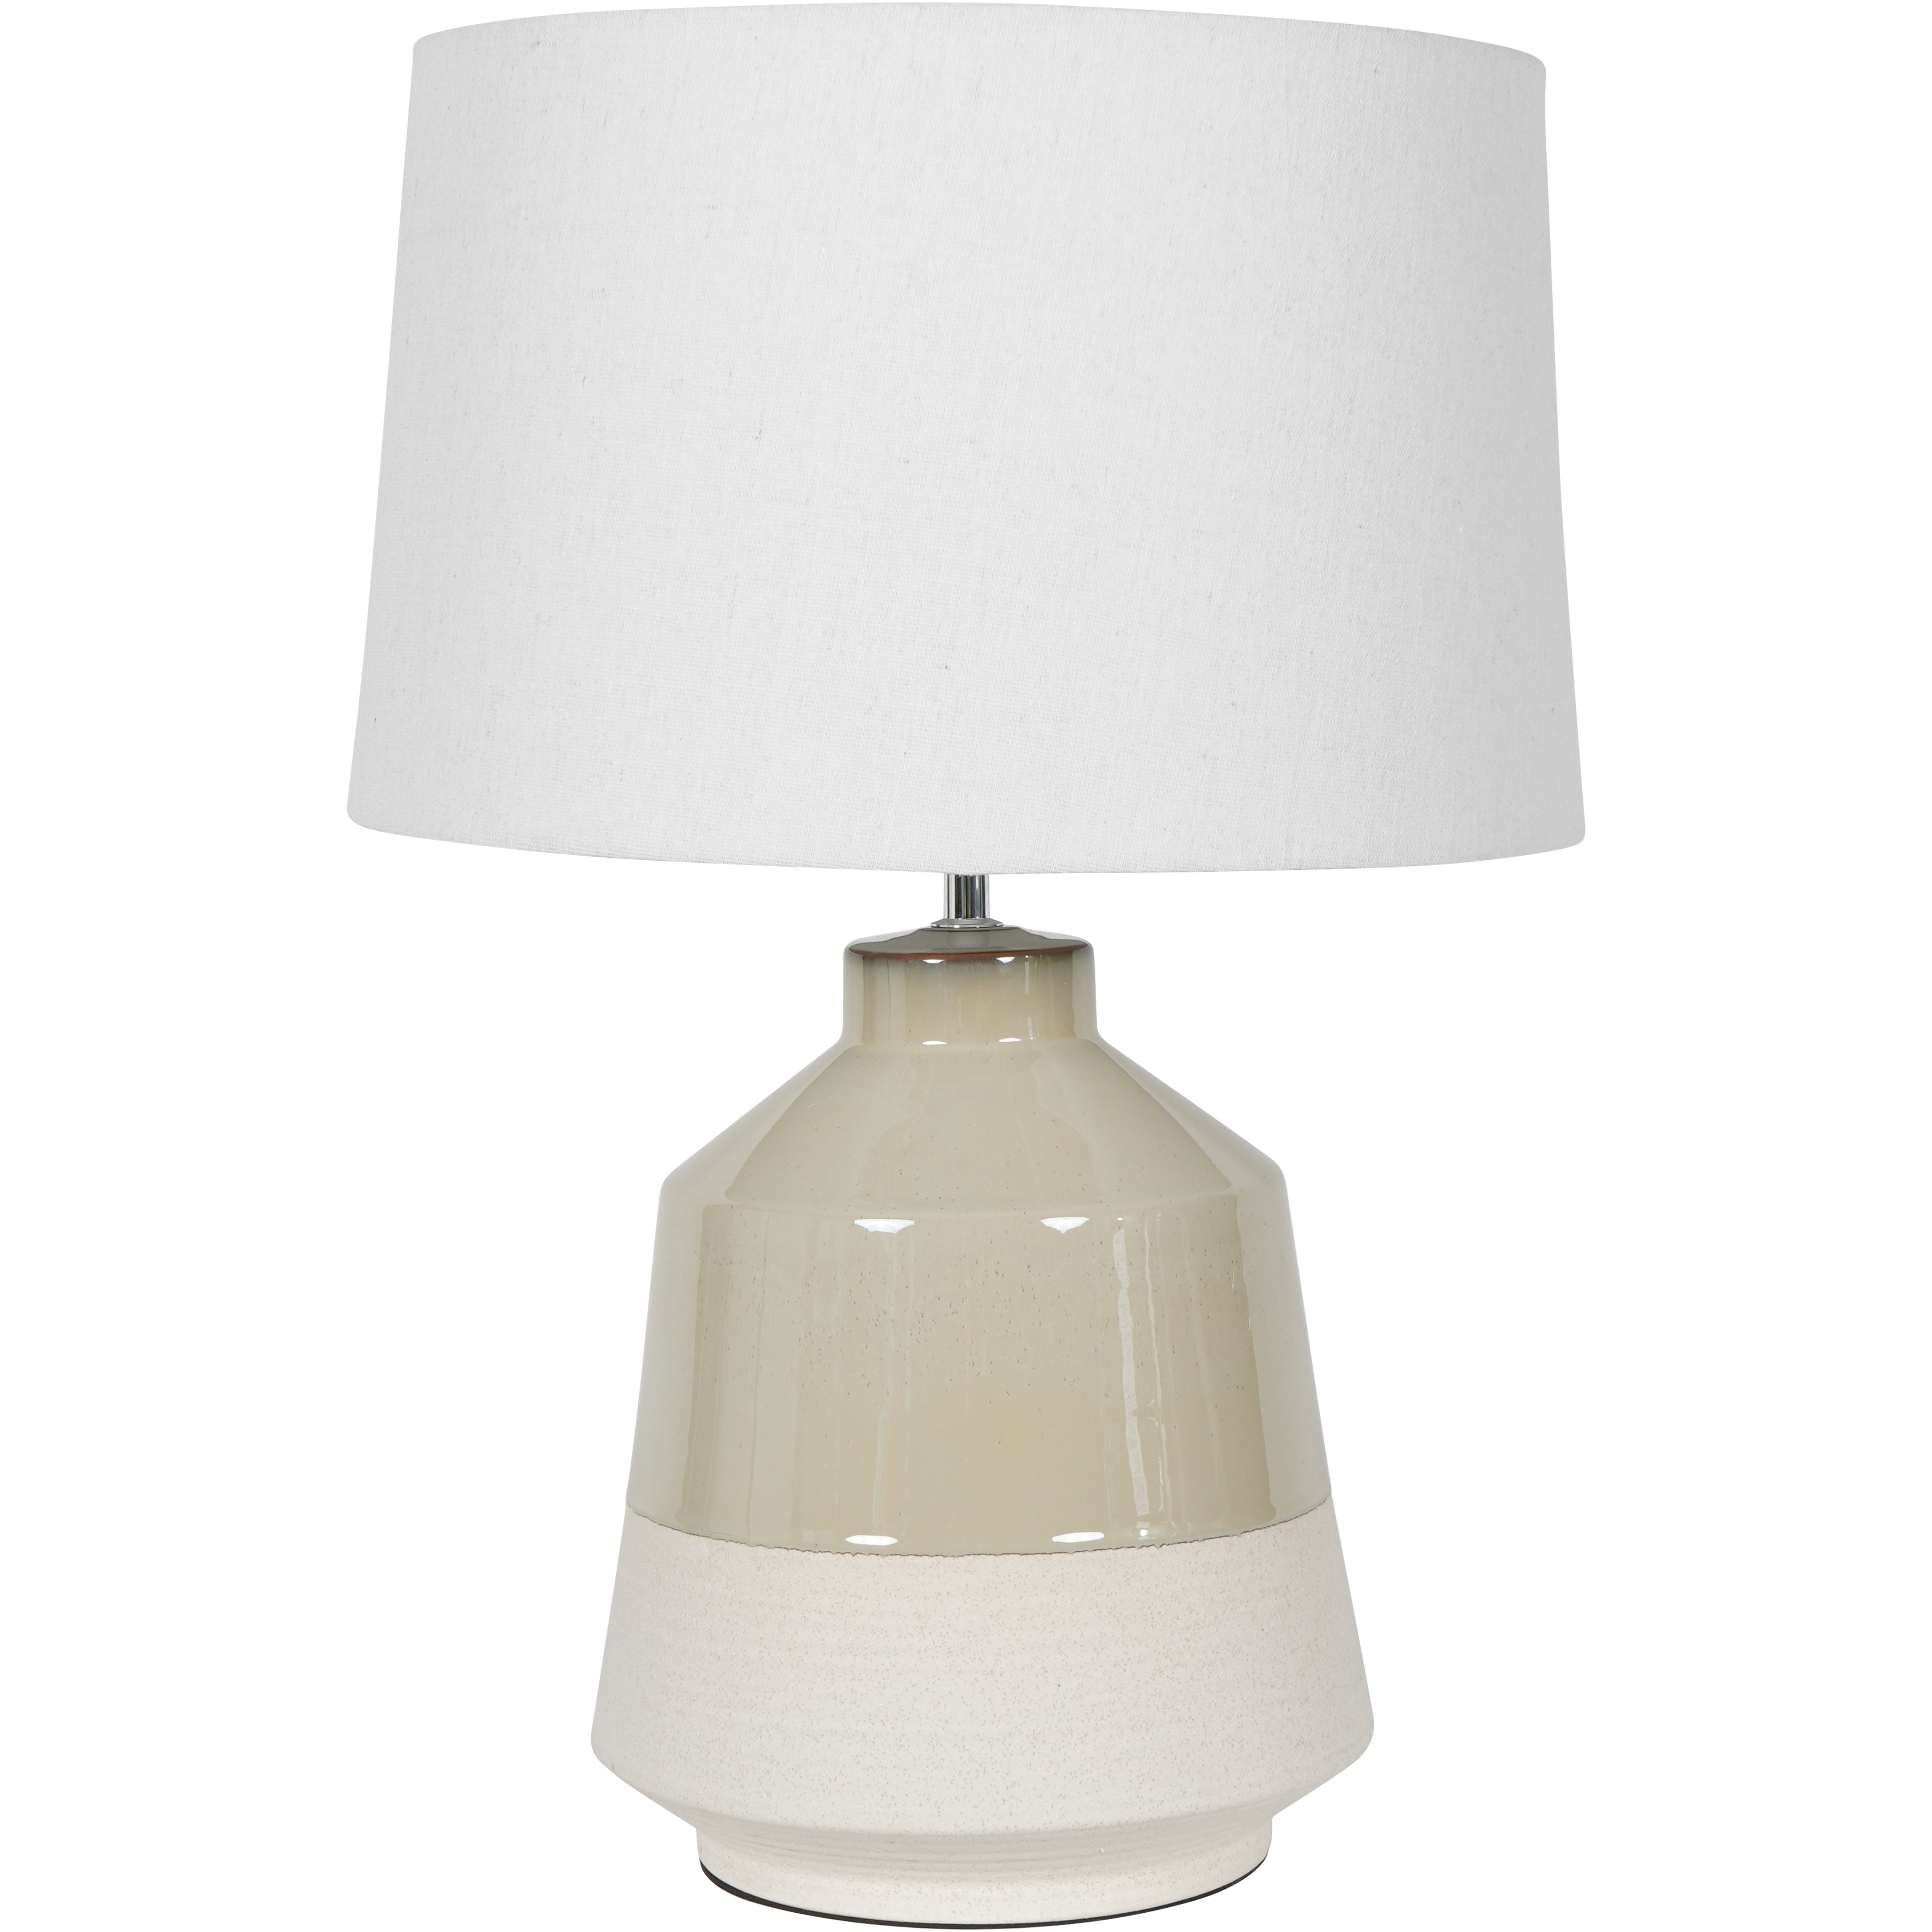 Chaucer Soft Green Dipped Glaze Table Lamp 58cm with Ivory Coolie Shade